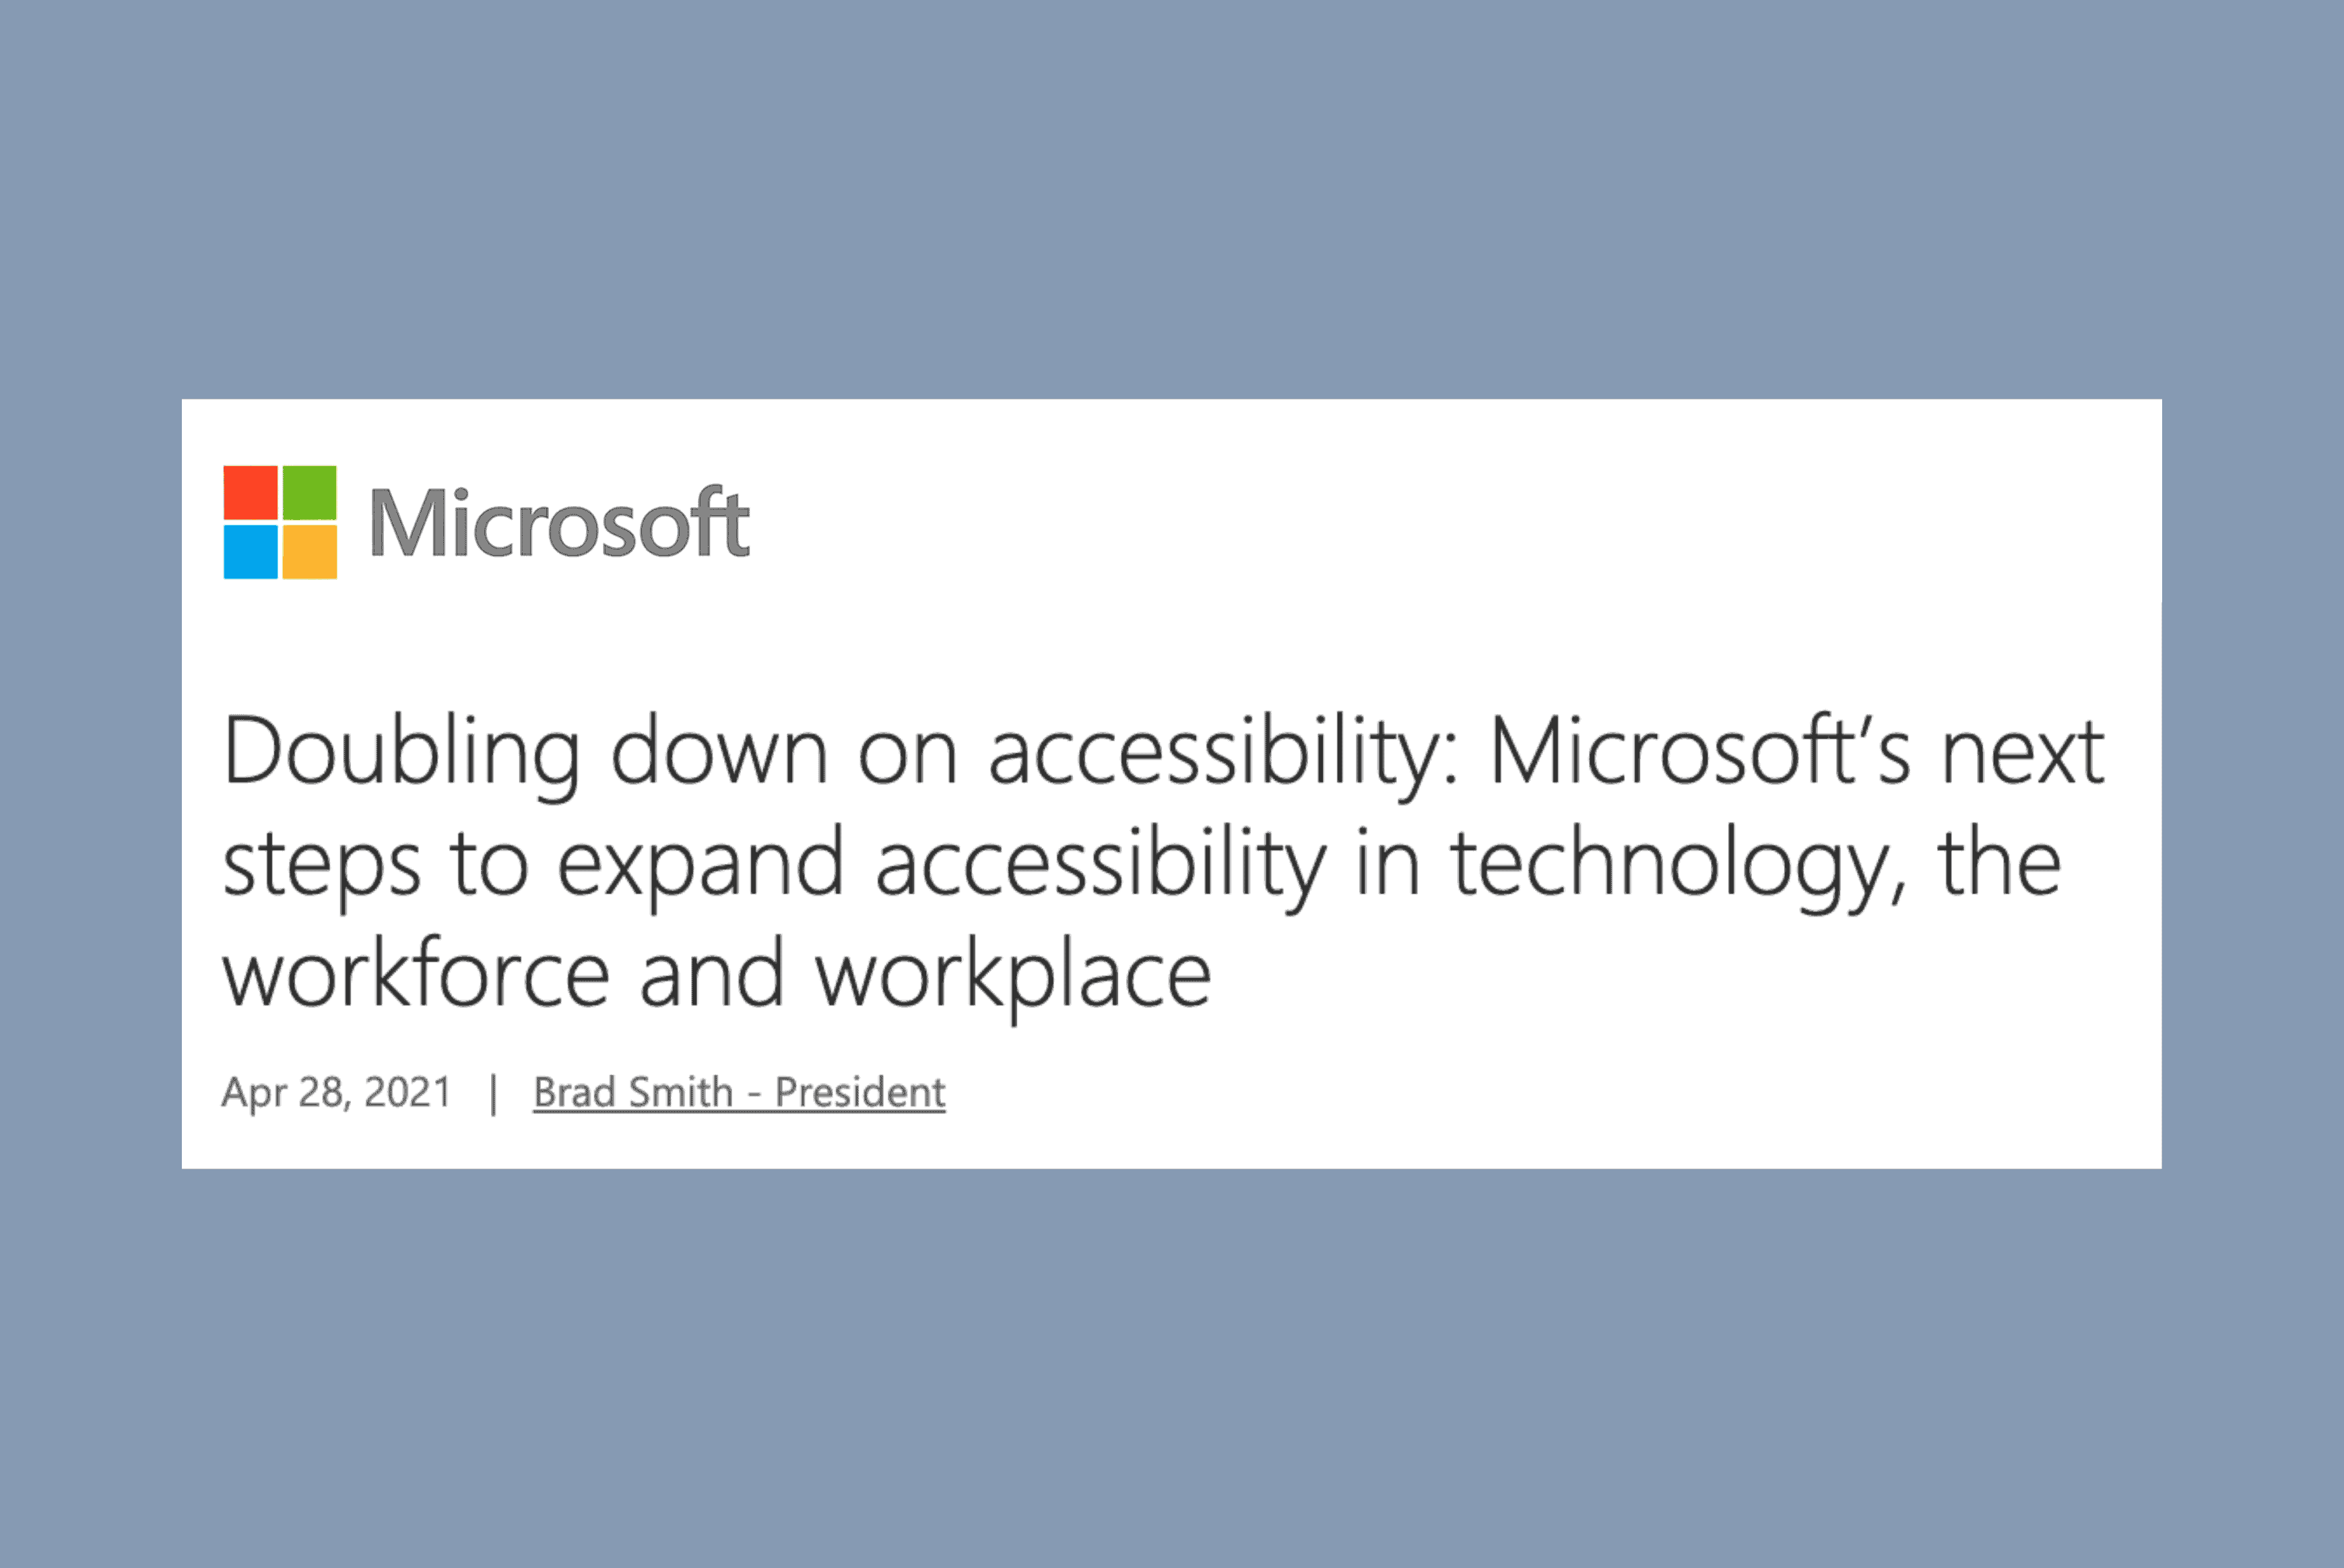 Inclusively Working with Microsoft to Expand Workforce